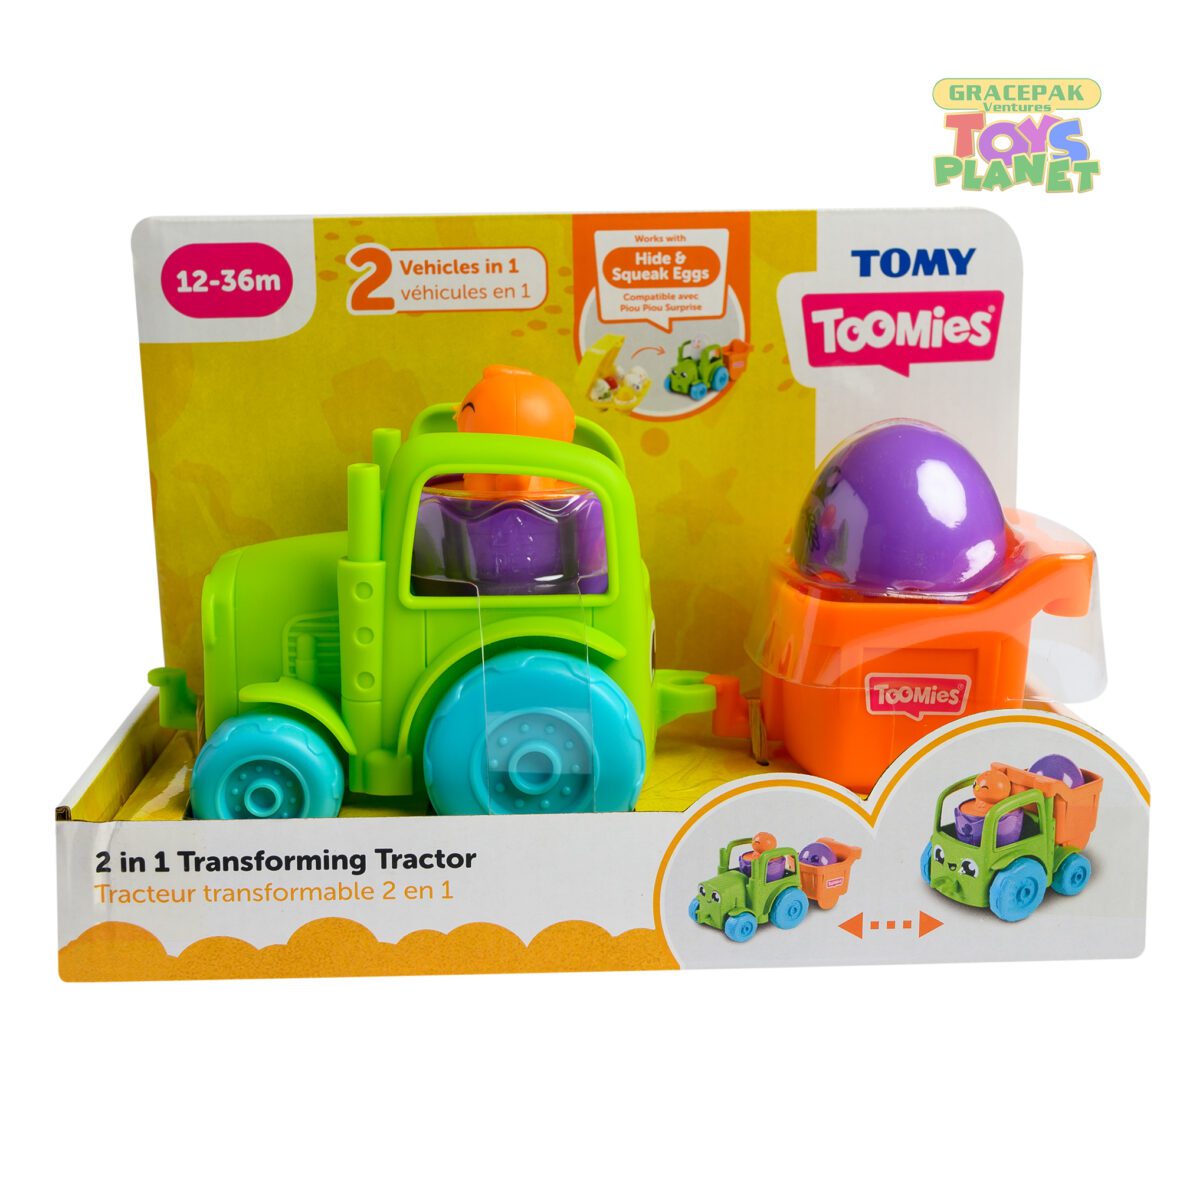 Tomy Toomies 2-in-1 Transforming Tractor